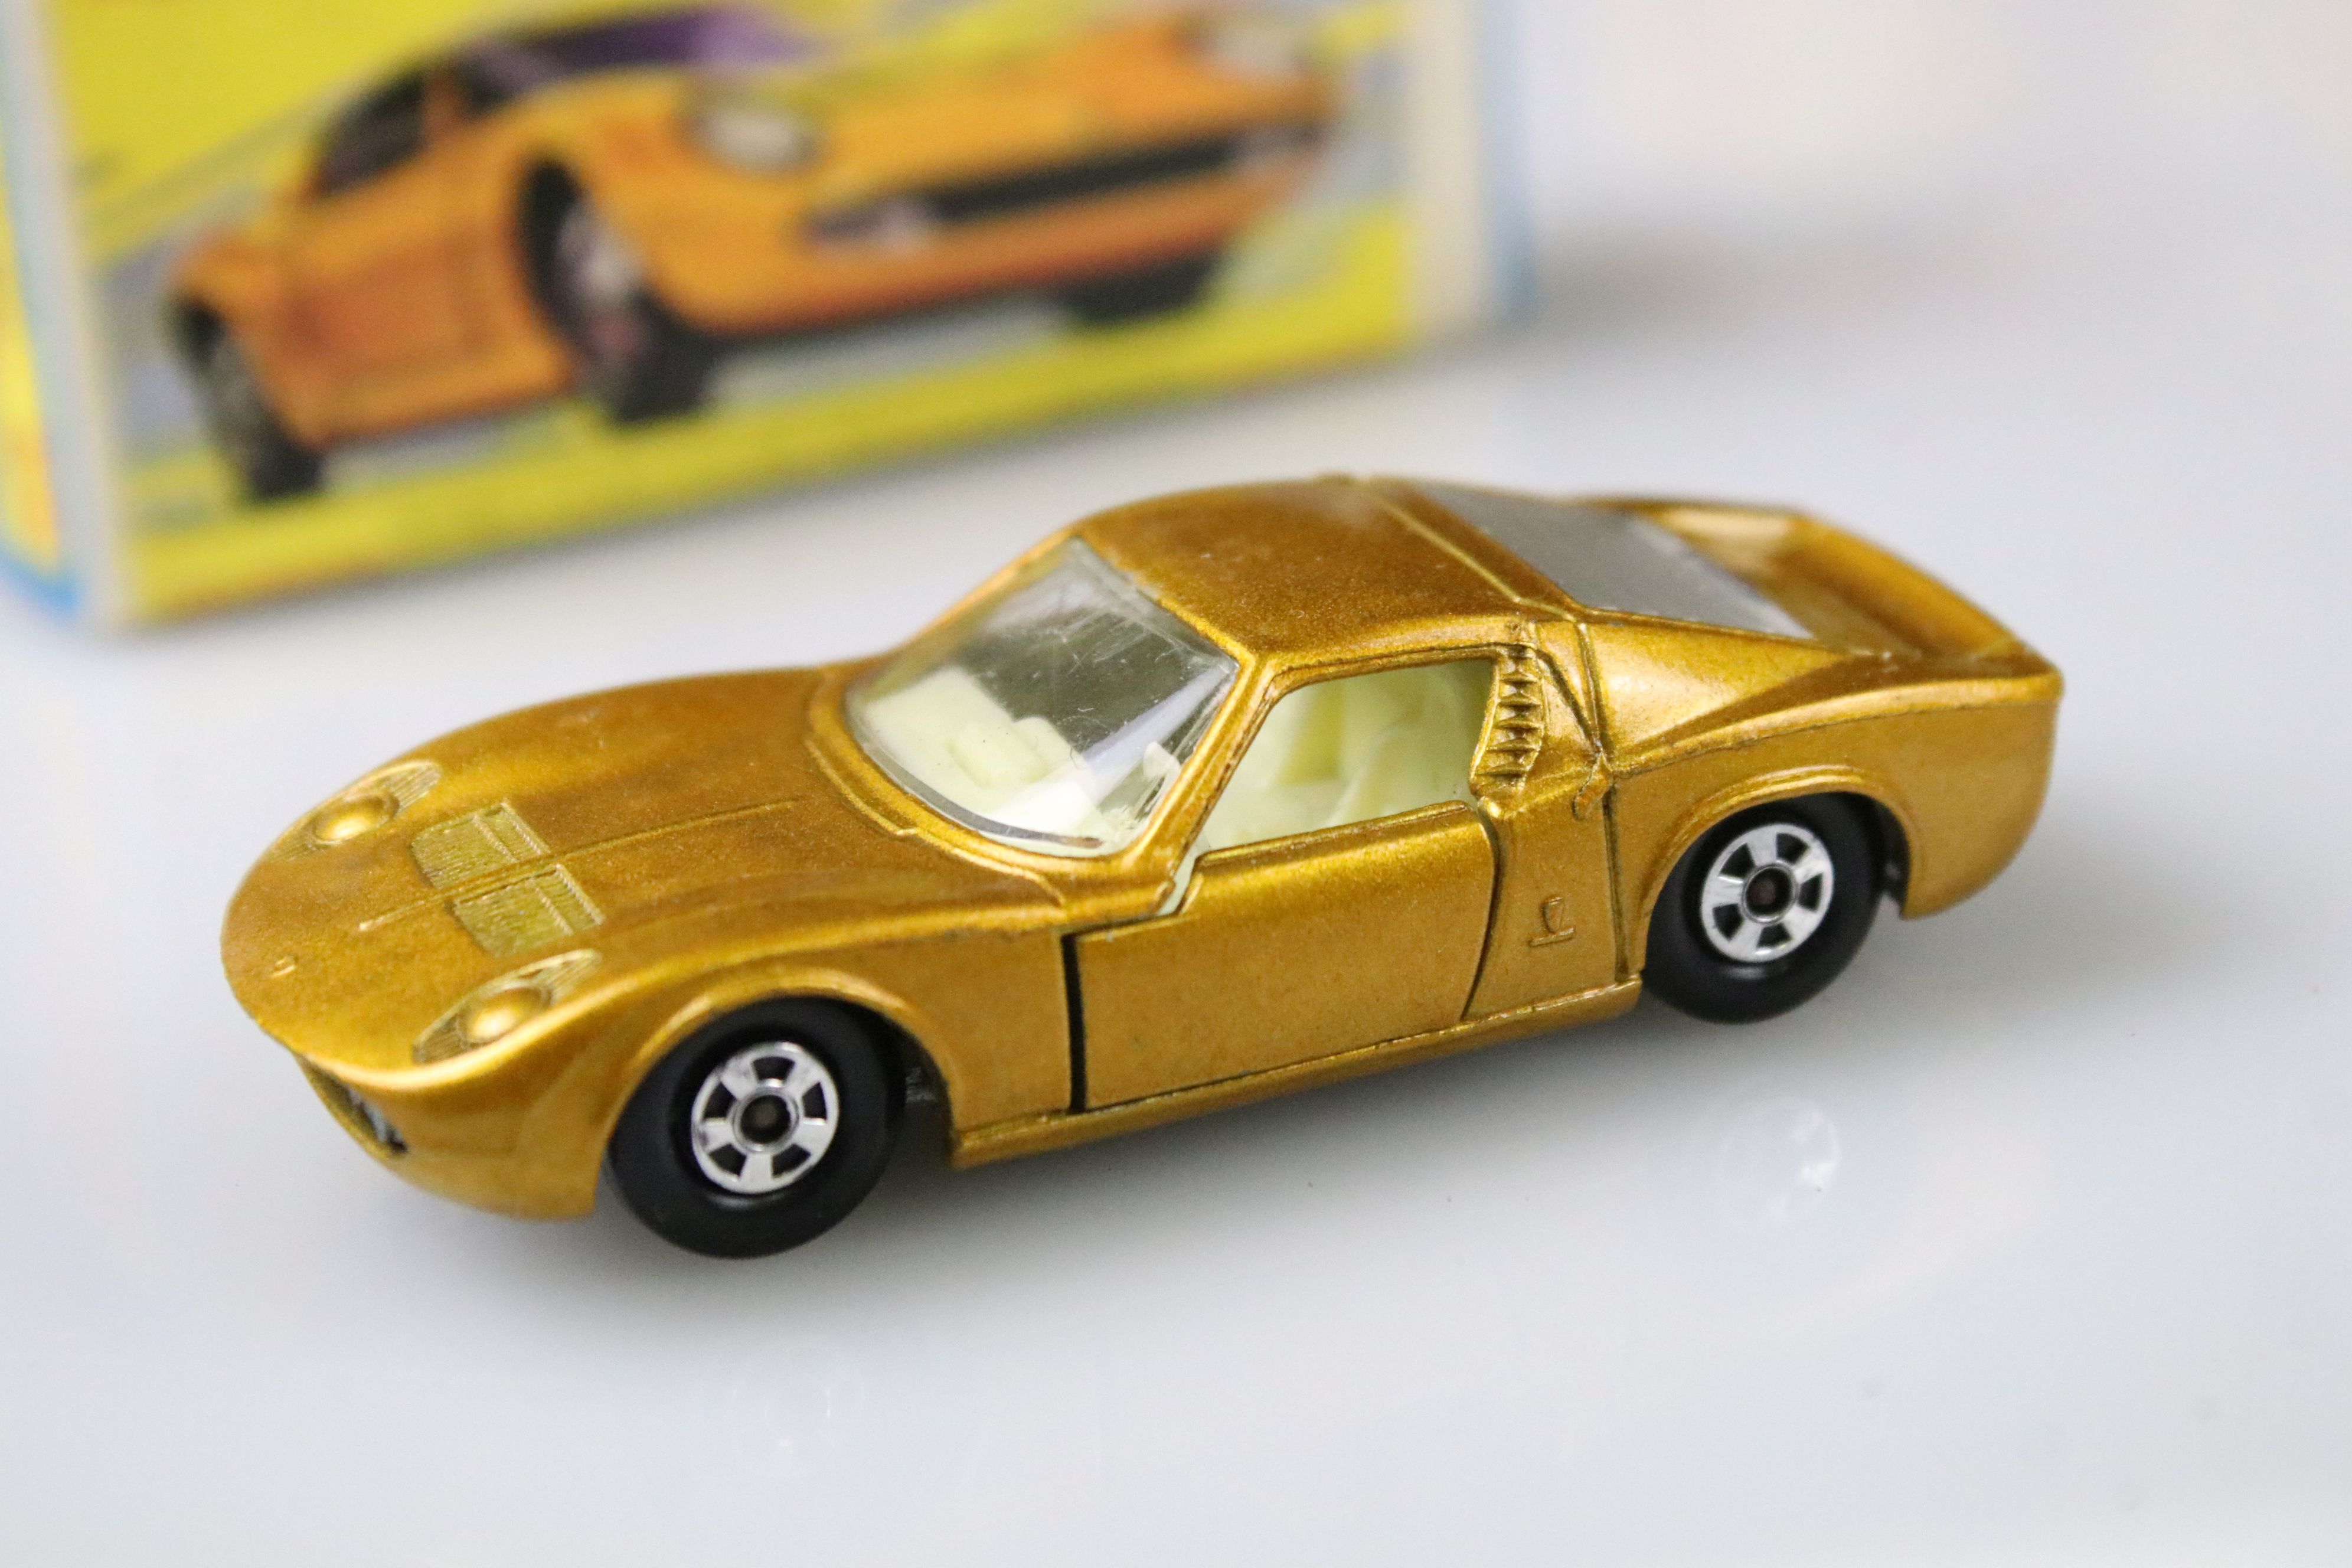 17 Boxed Matchbox Superfast diecast models to include 41 Ford GT, 29 Racing Mini, 57 Landrover - Image 35 of 53